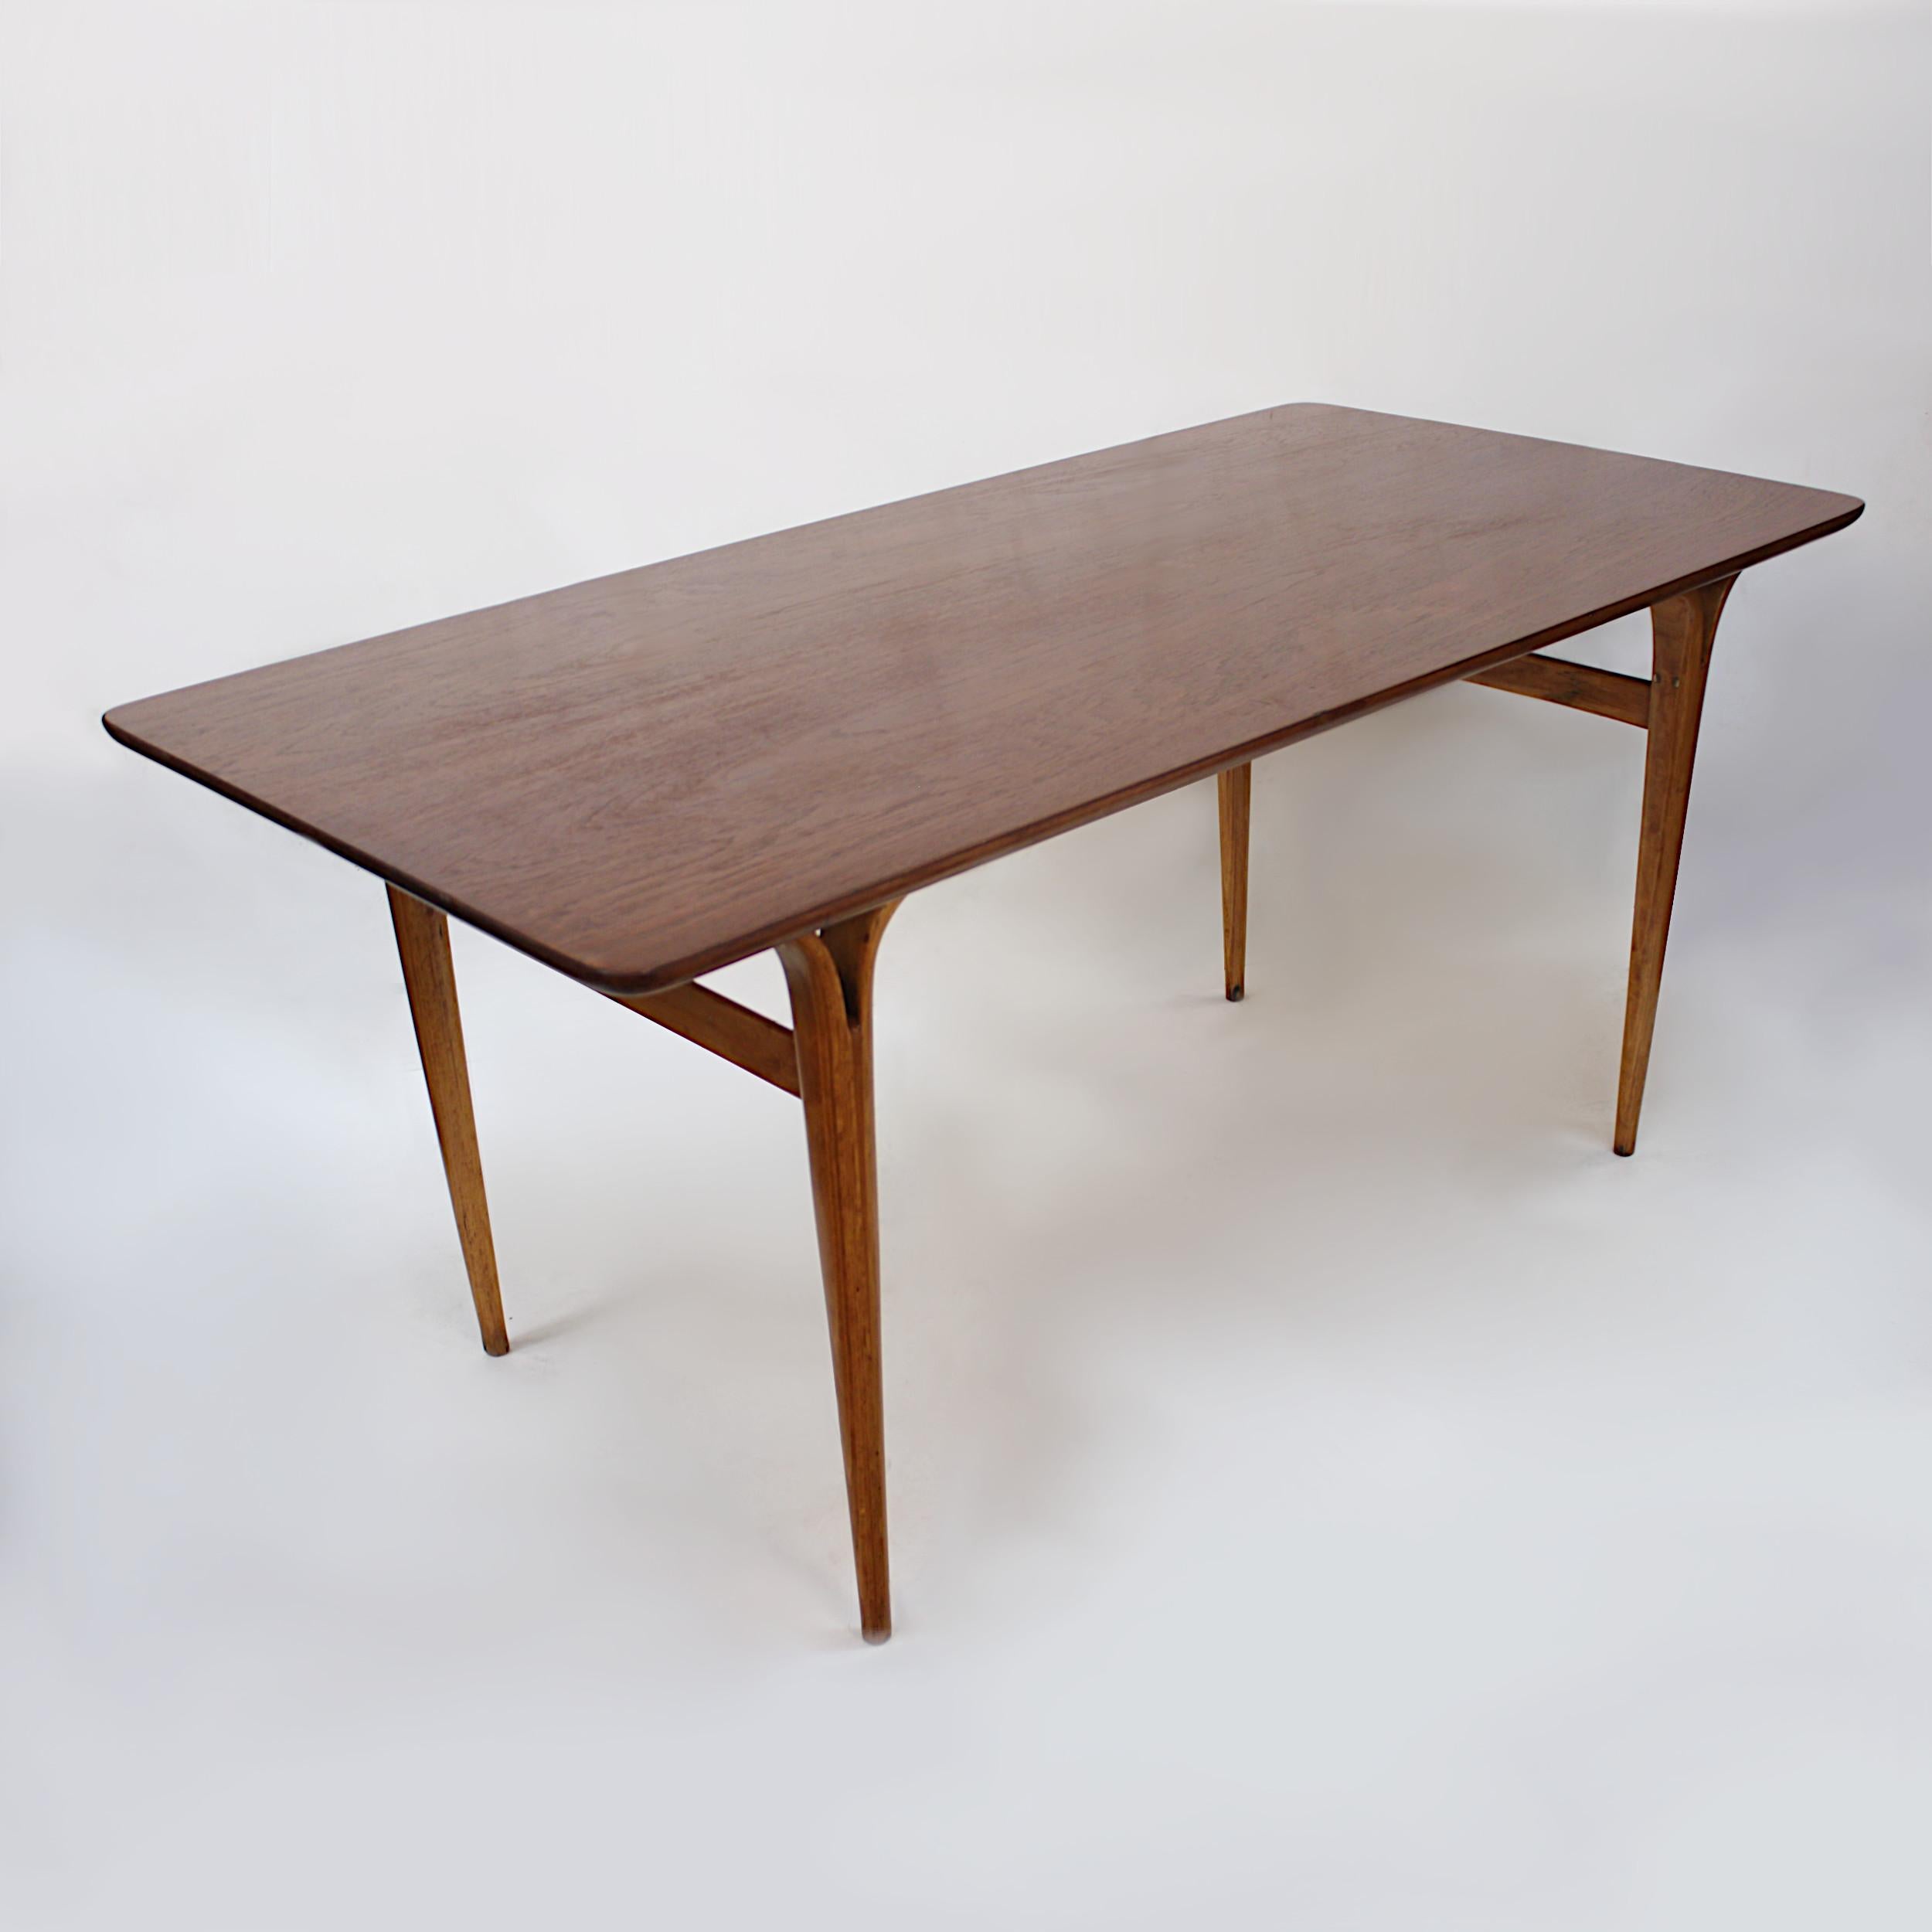 Wonderful 'Table with Cleft Legs' by Bruno Mathsson for Firma Karl Mathsson. Table features teak veneer top, solid bentwood beech legs with that wonderful cleft design, and unique size. This same table is part of the permanent Architecture and